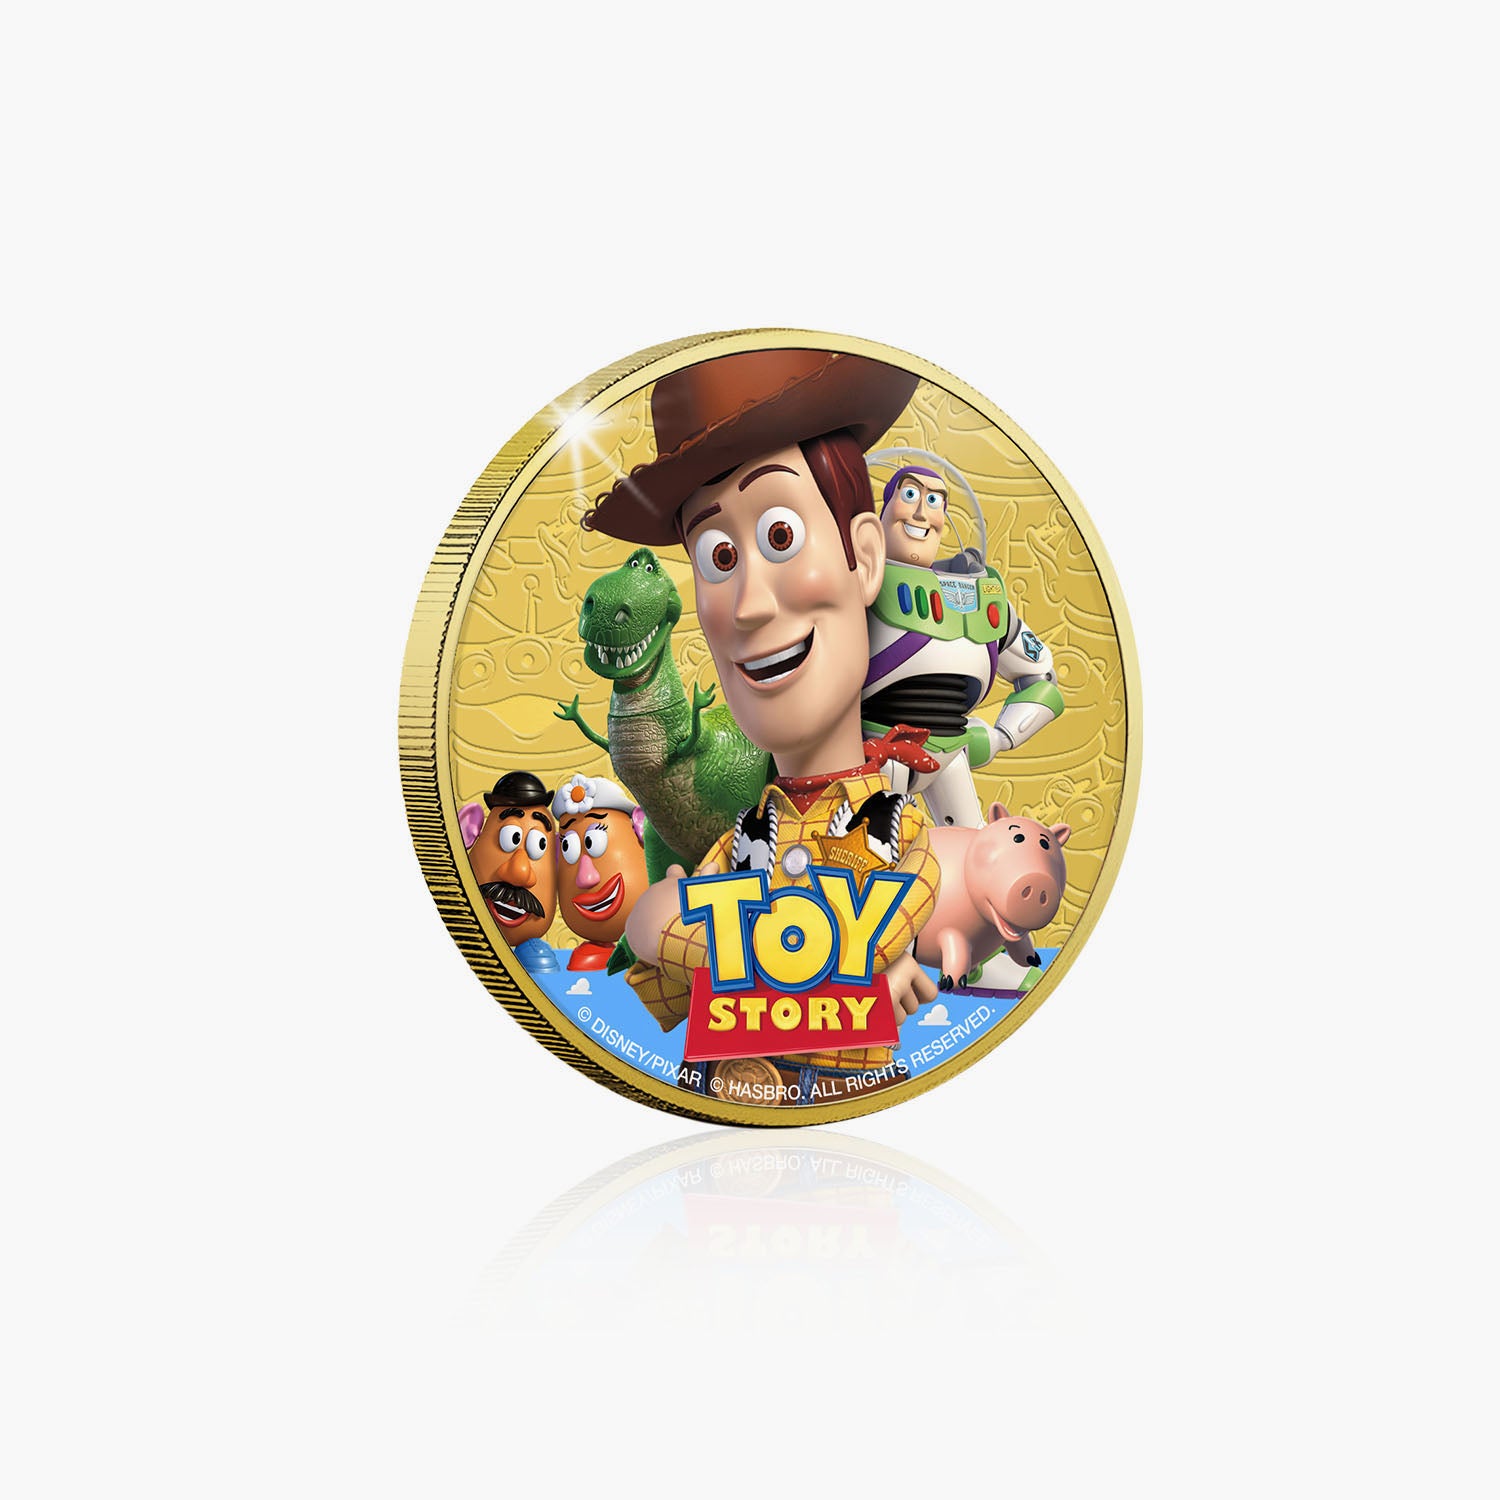 Toy Story Gold-Plated Commemorative